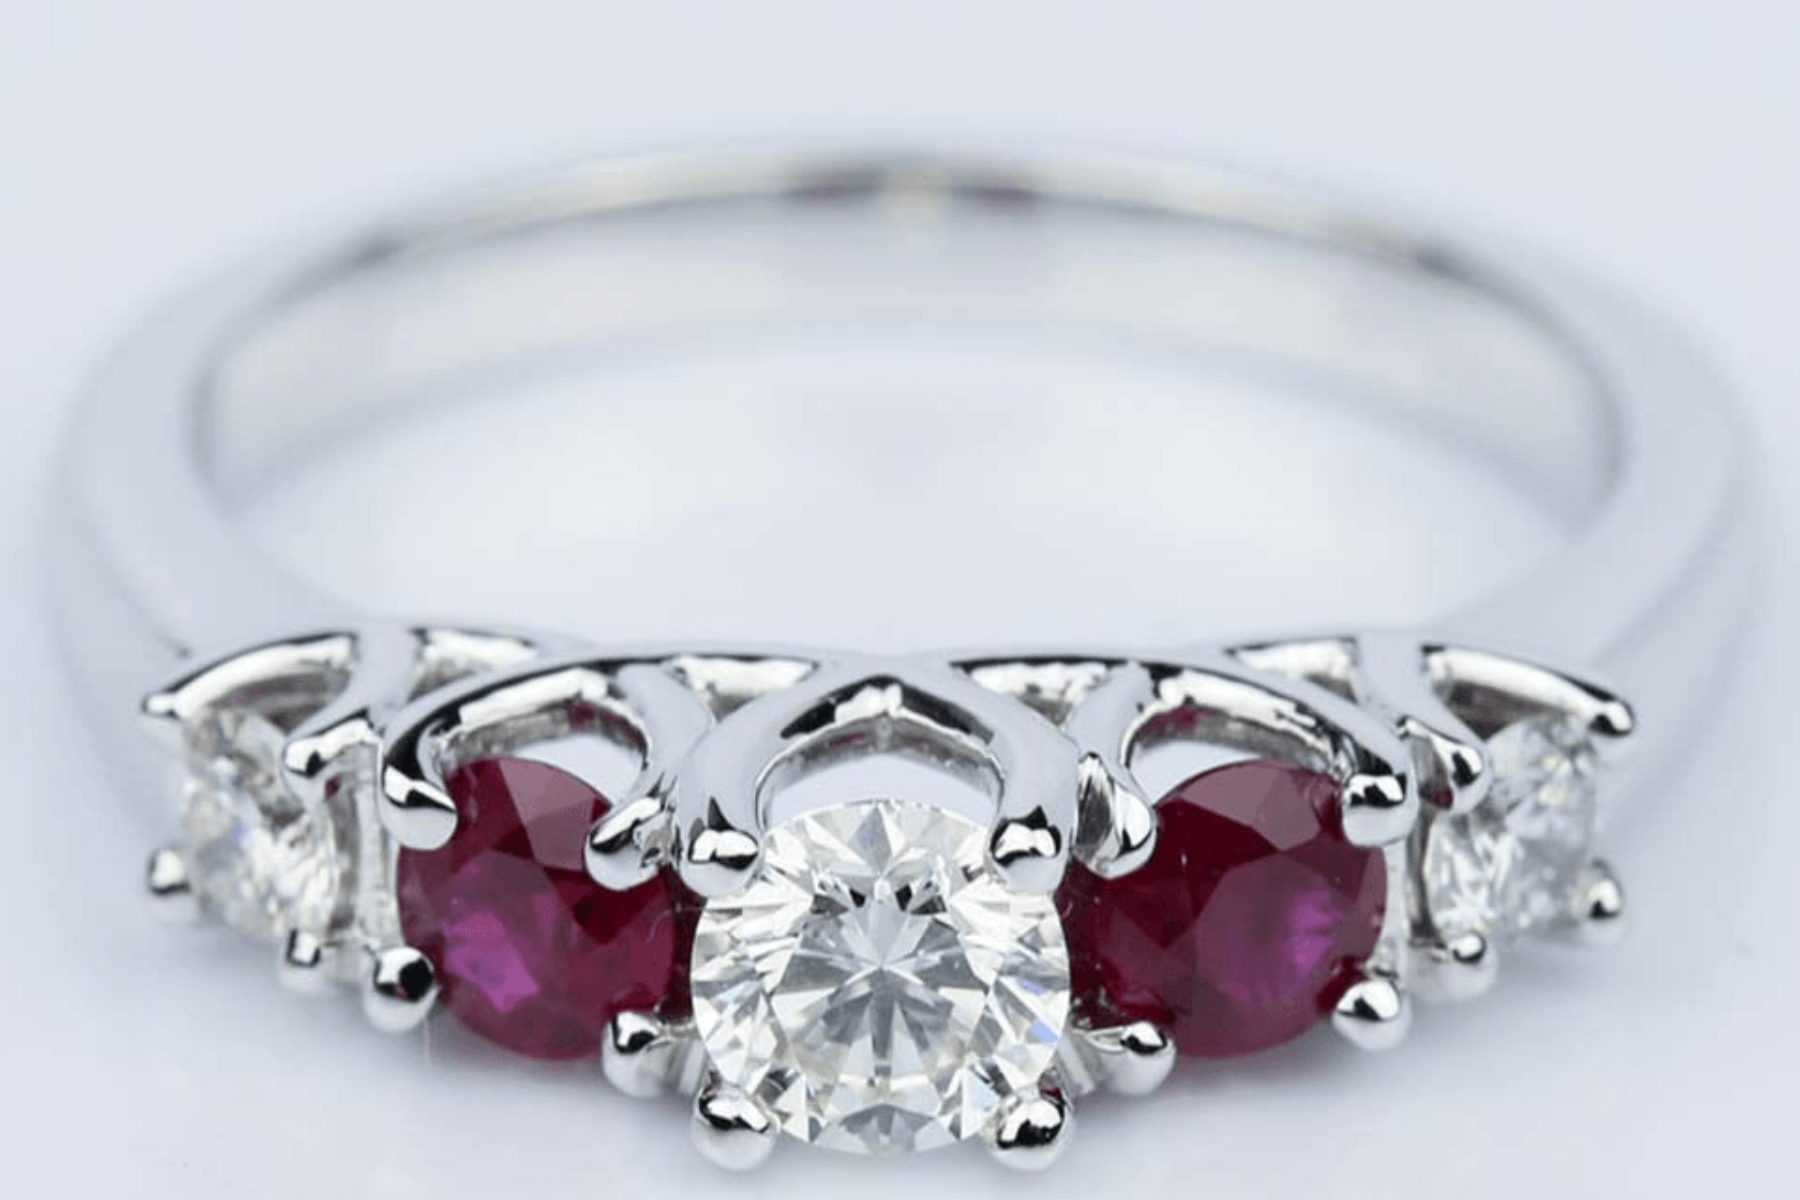 A ring with two red birthstones with diamonds